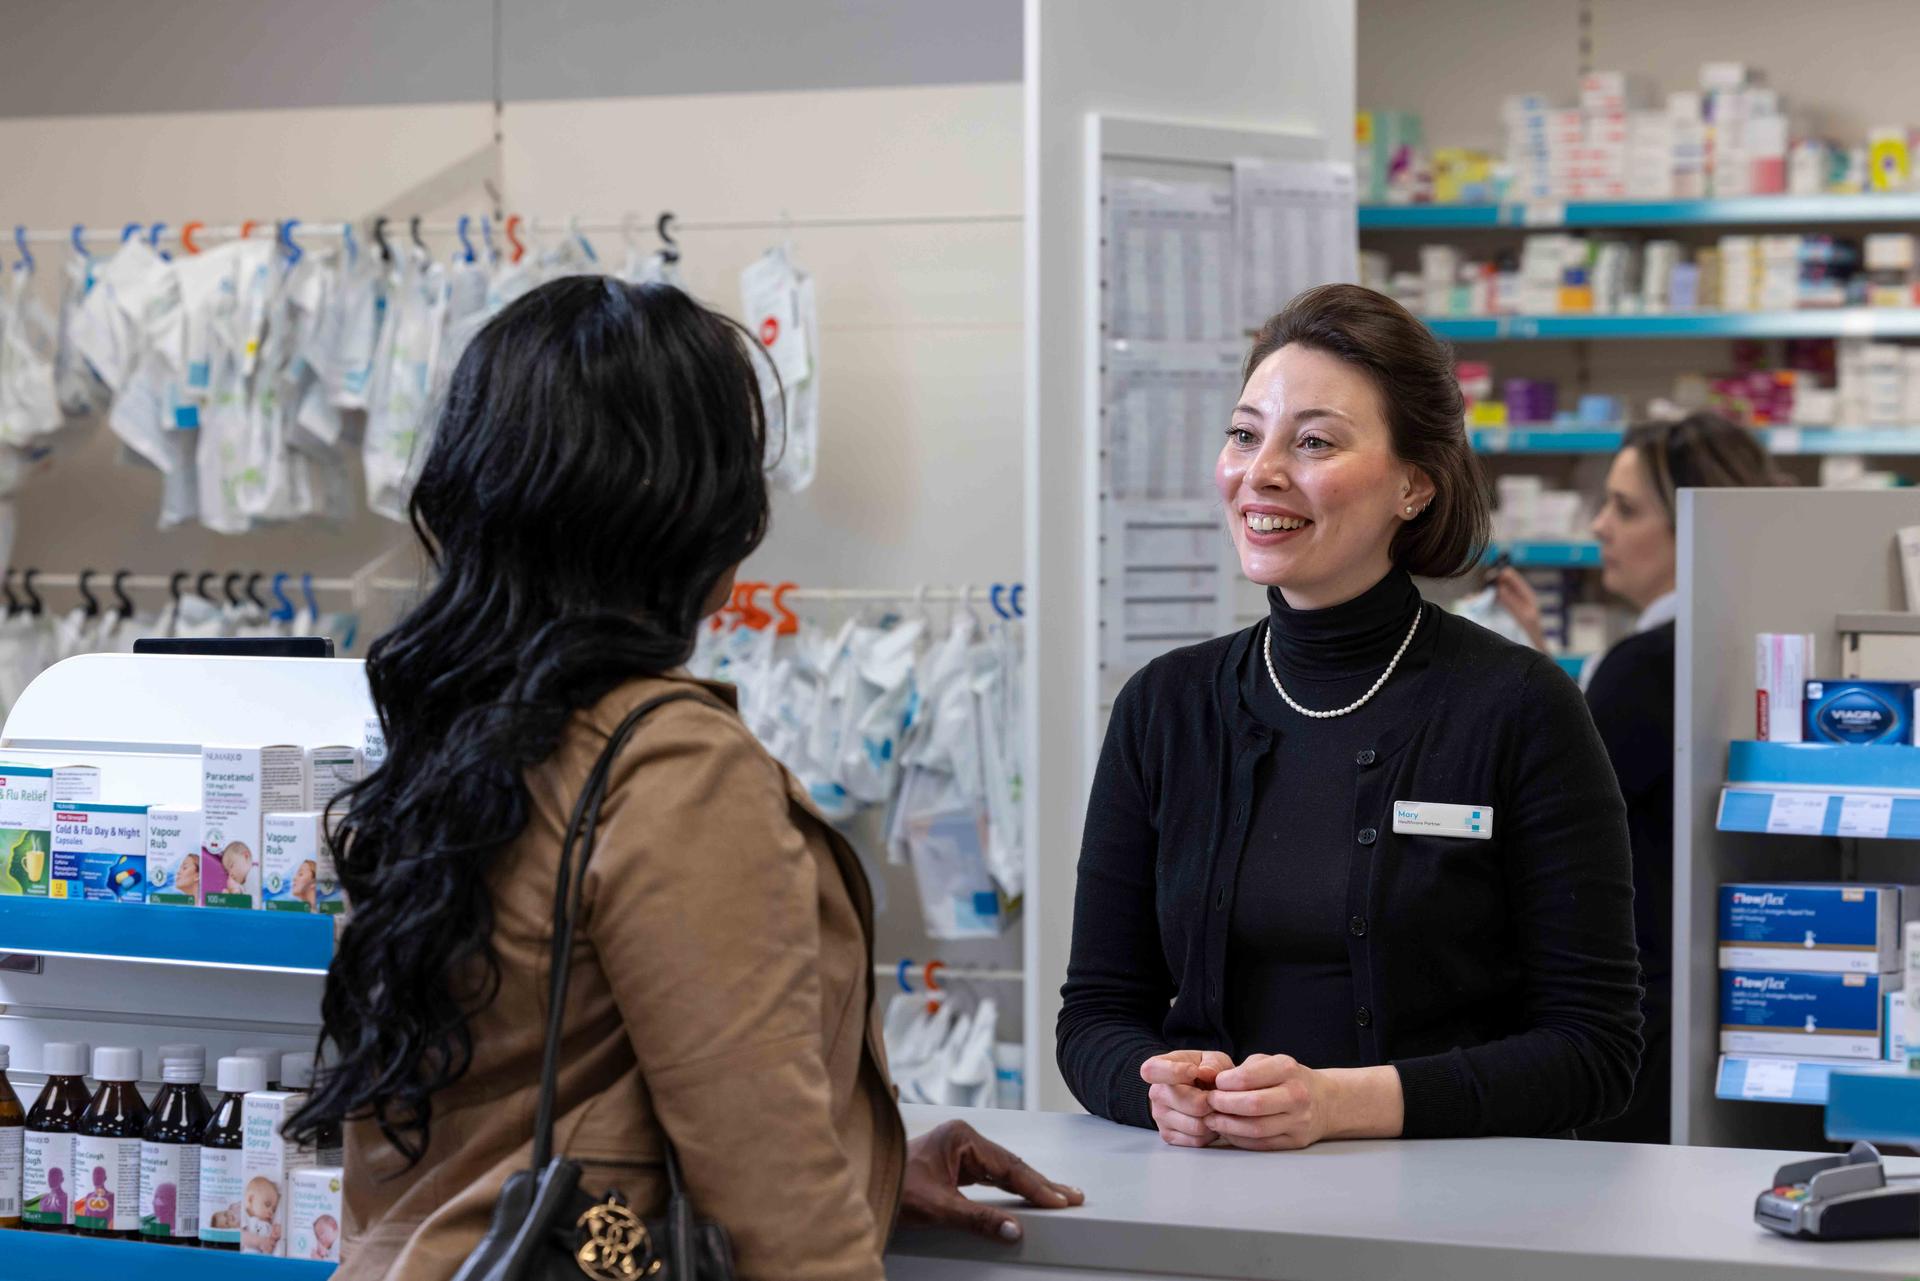 Female pharmacist speaking to a female customer over the counter